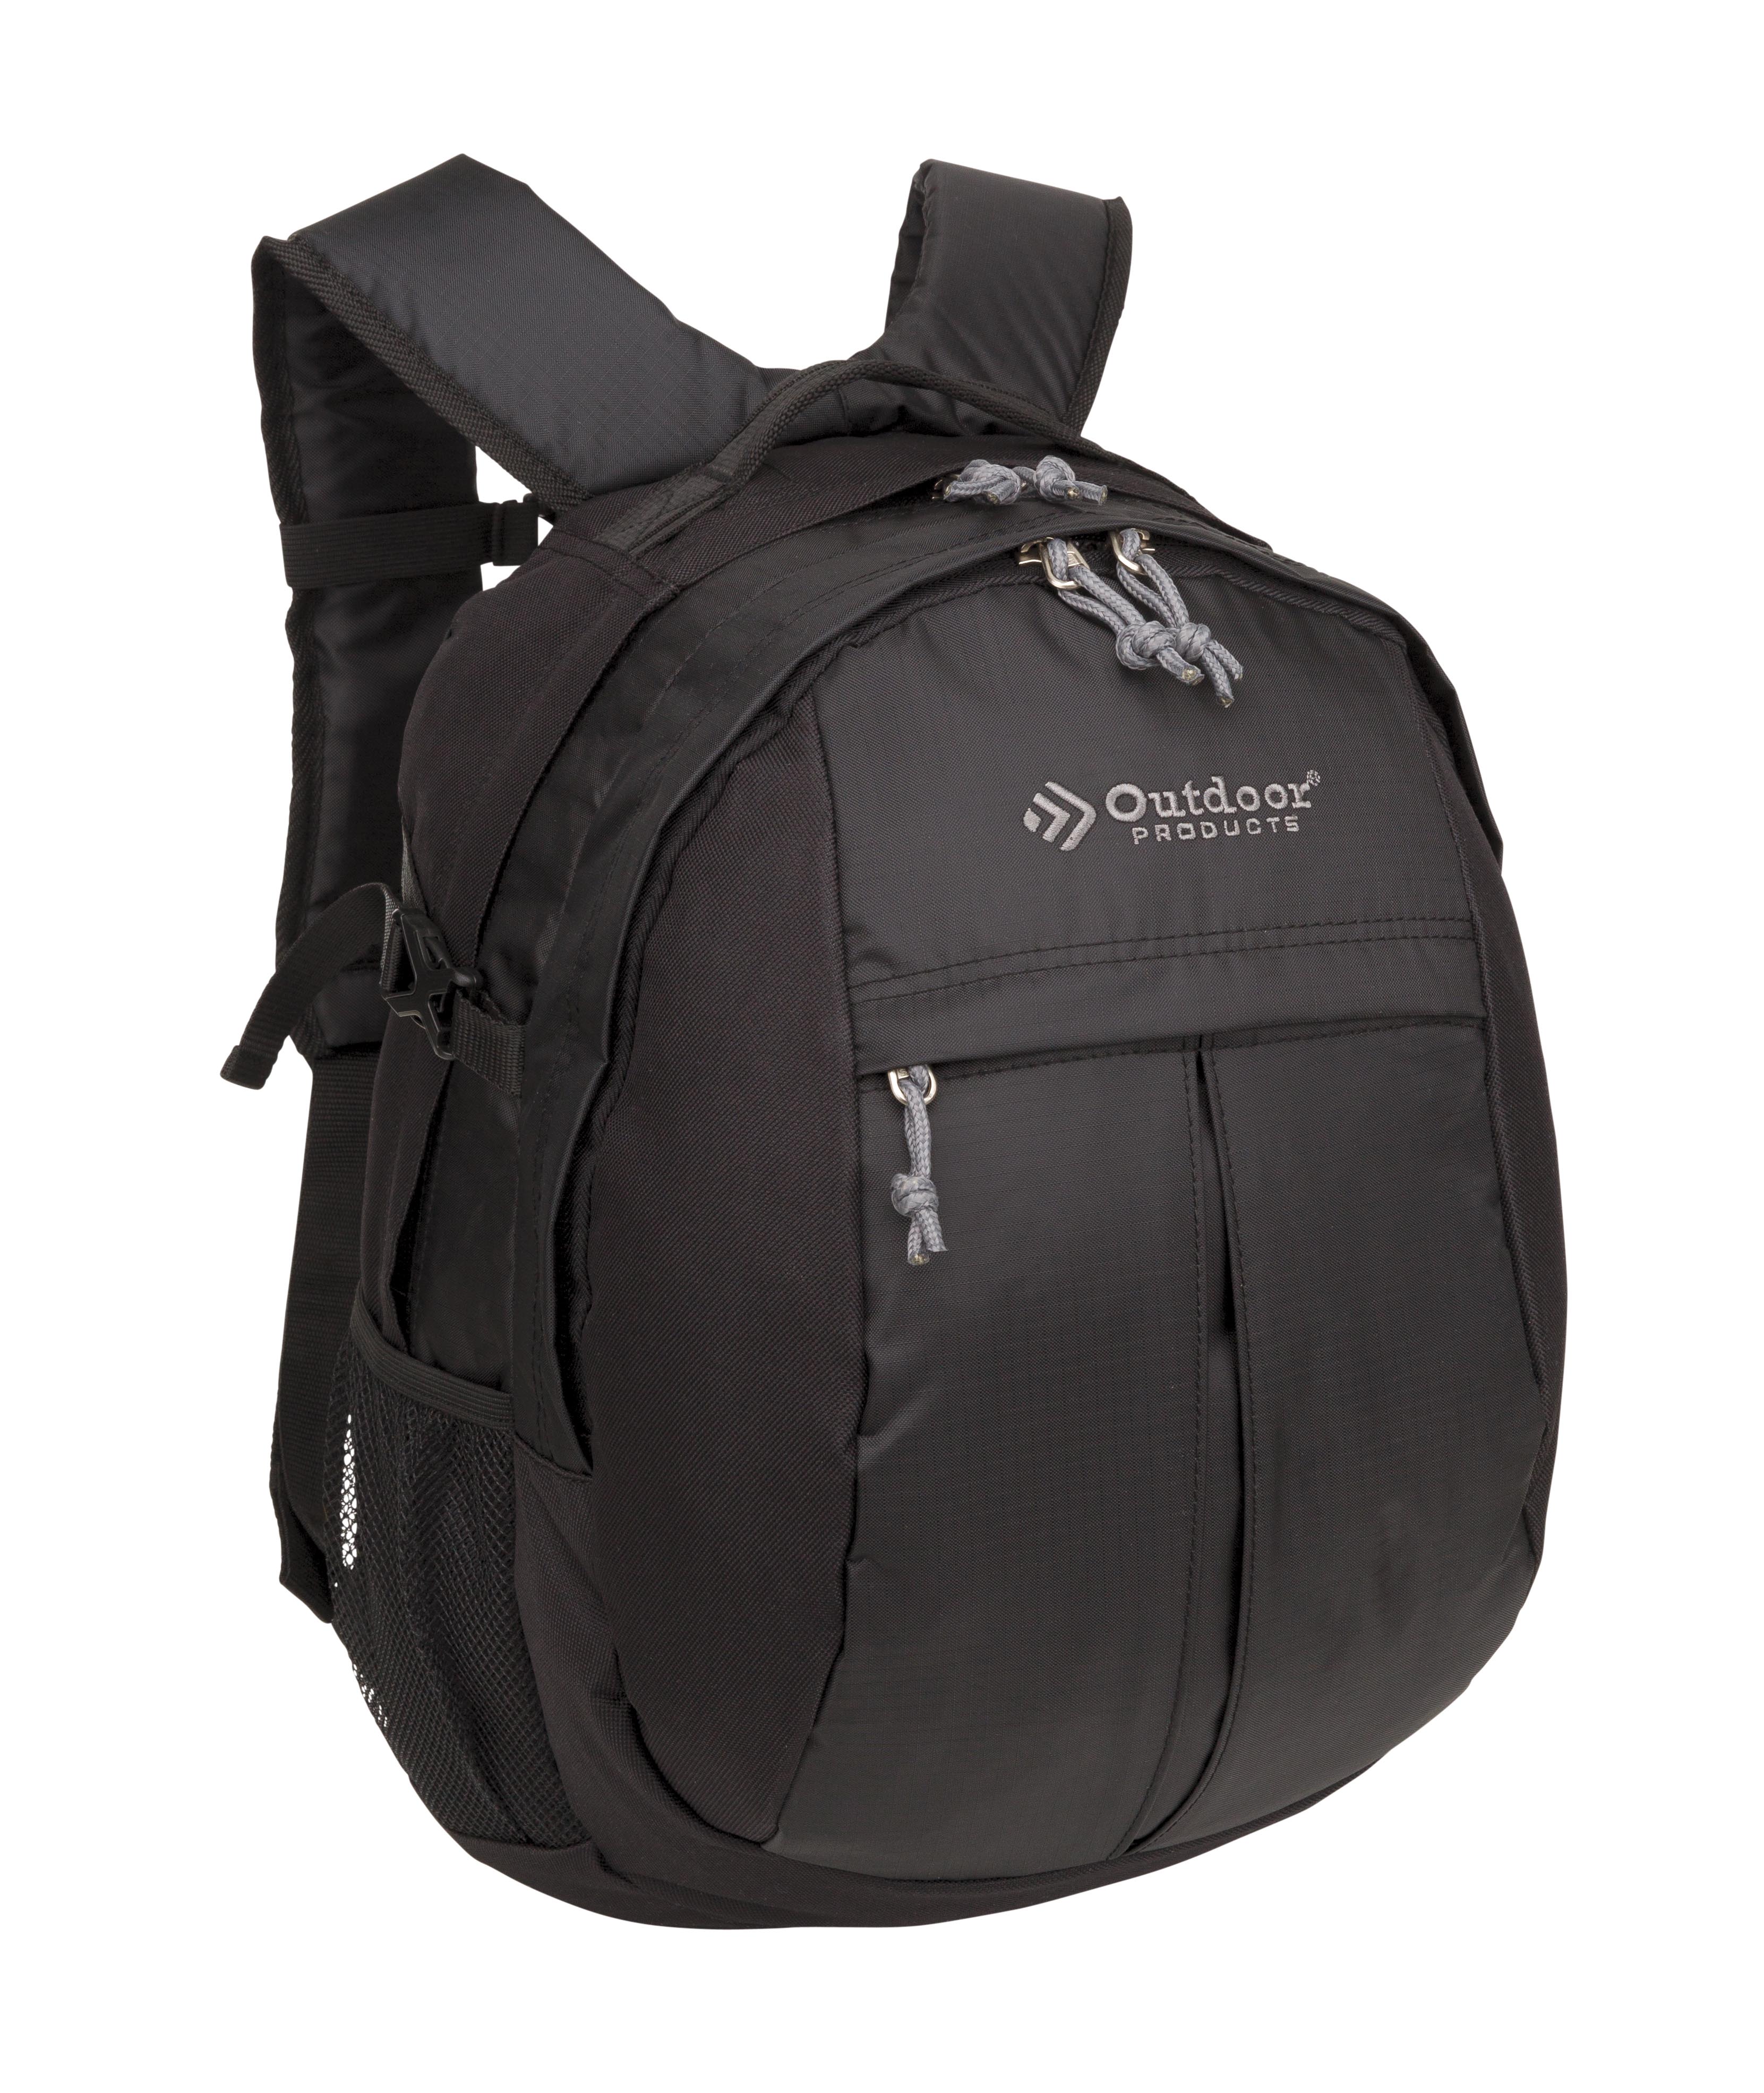 Outdoor Products 25 Ltr Traverse Backpack, Black, Unisex, Adult, Teen, Polyester - image 1 of 15